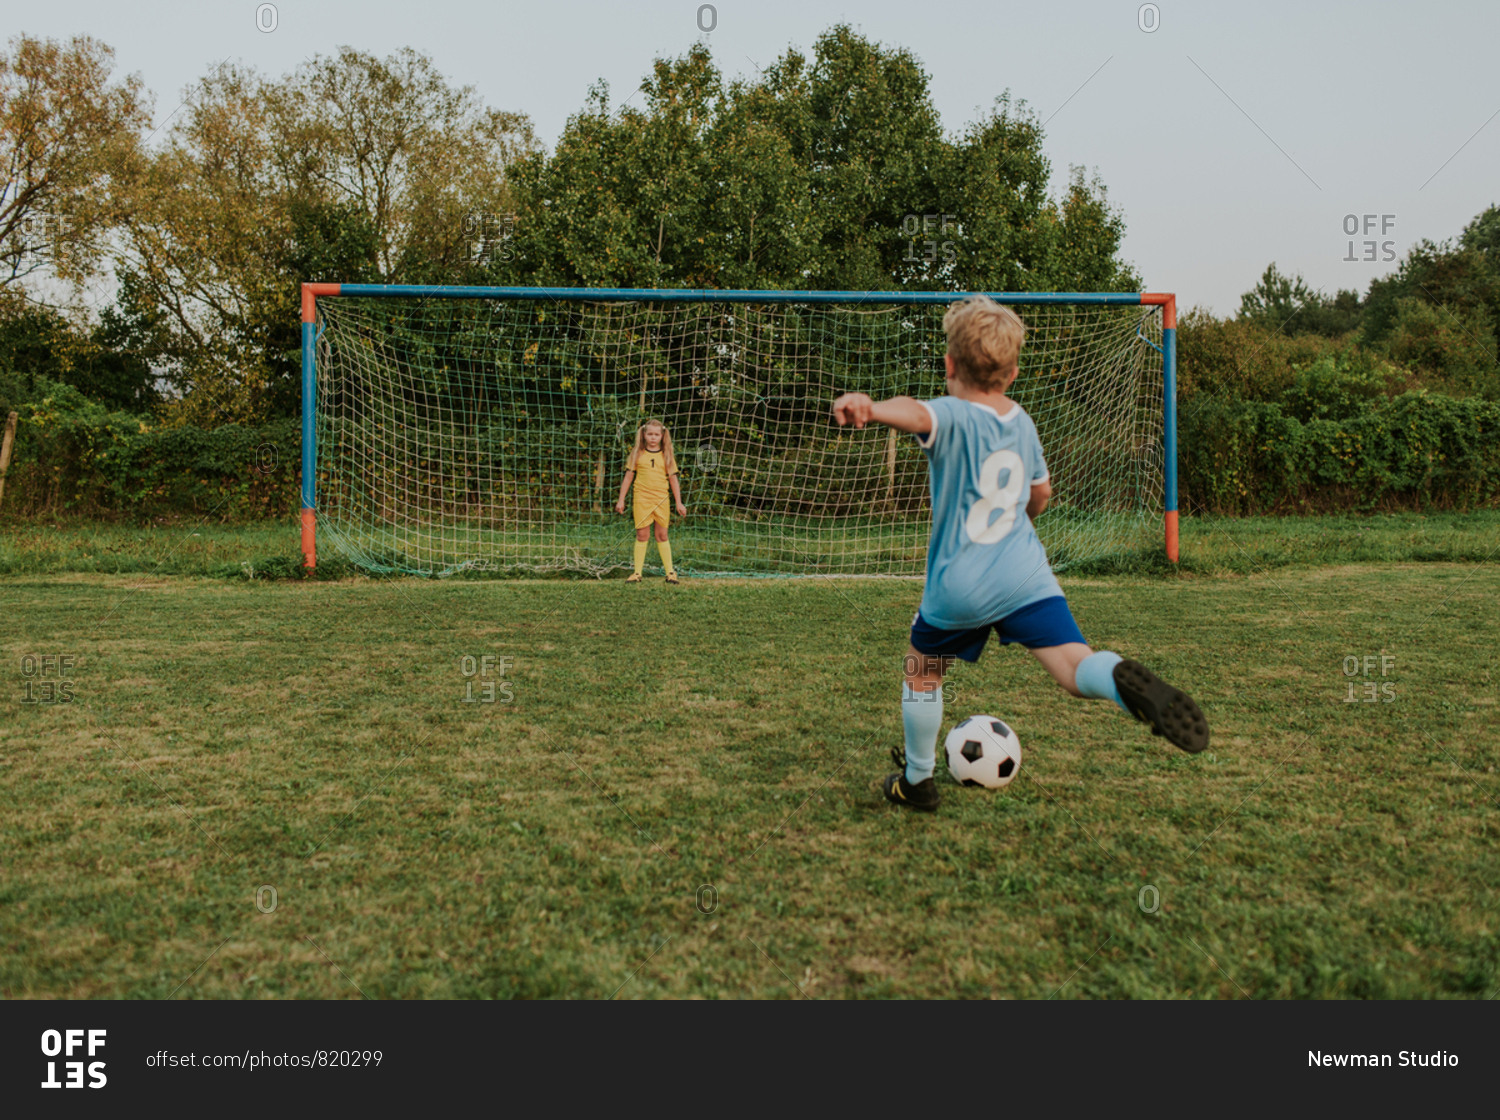 Back view of a child wearing football dress shooting ball in front of goal. Full length of girl goalkeeper standing at goal and soccer player kicking ball.